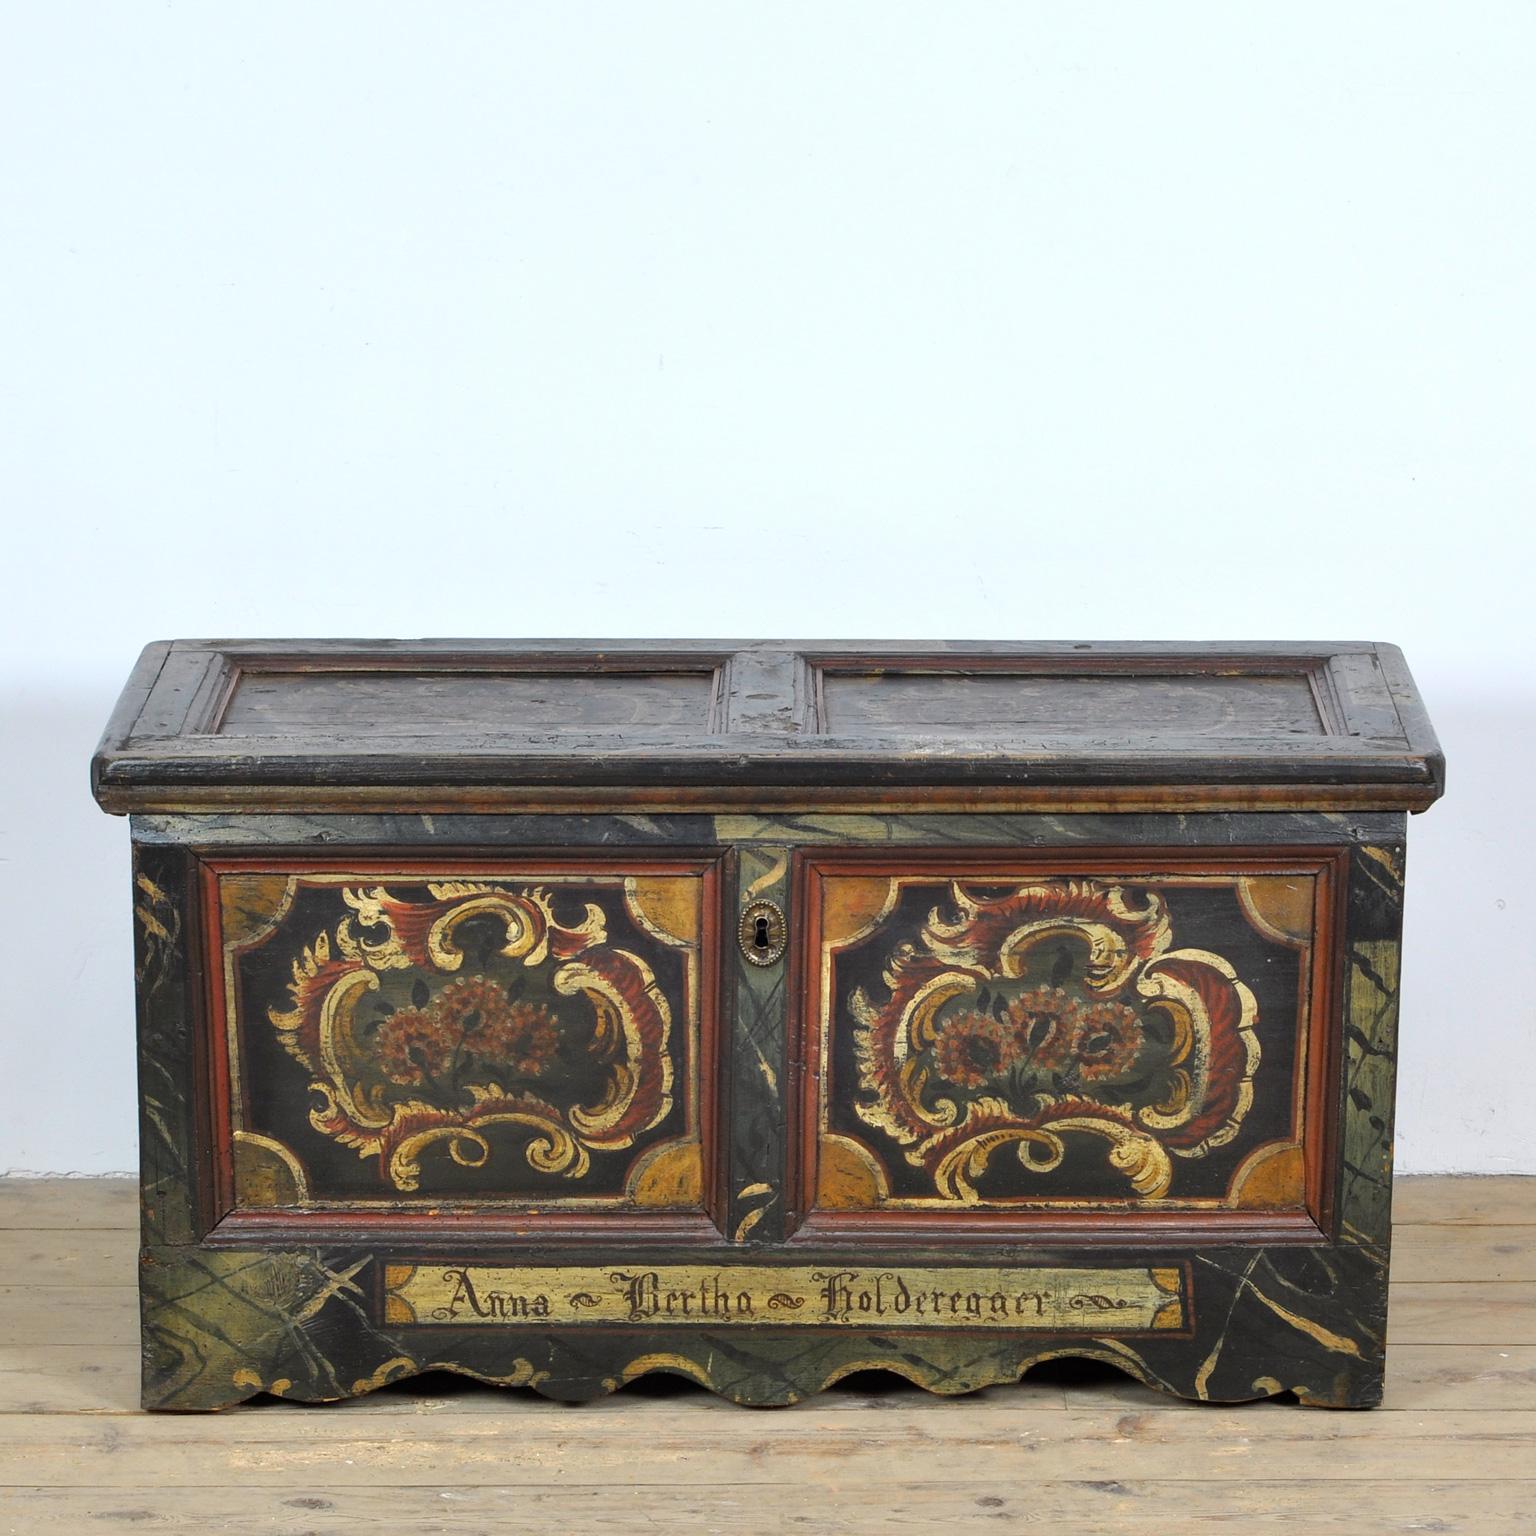 German dowry chest made circa 1820 for one Anna Bertha Holderegger. Hand painted with beautiful fine details. The iron details such as the hinges are forged by hand. The box is made of pine and oak. The inside consists of three compartments.